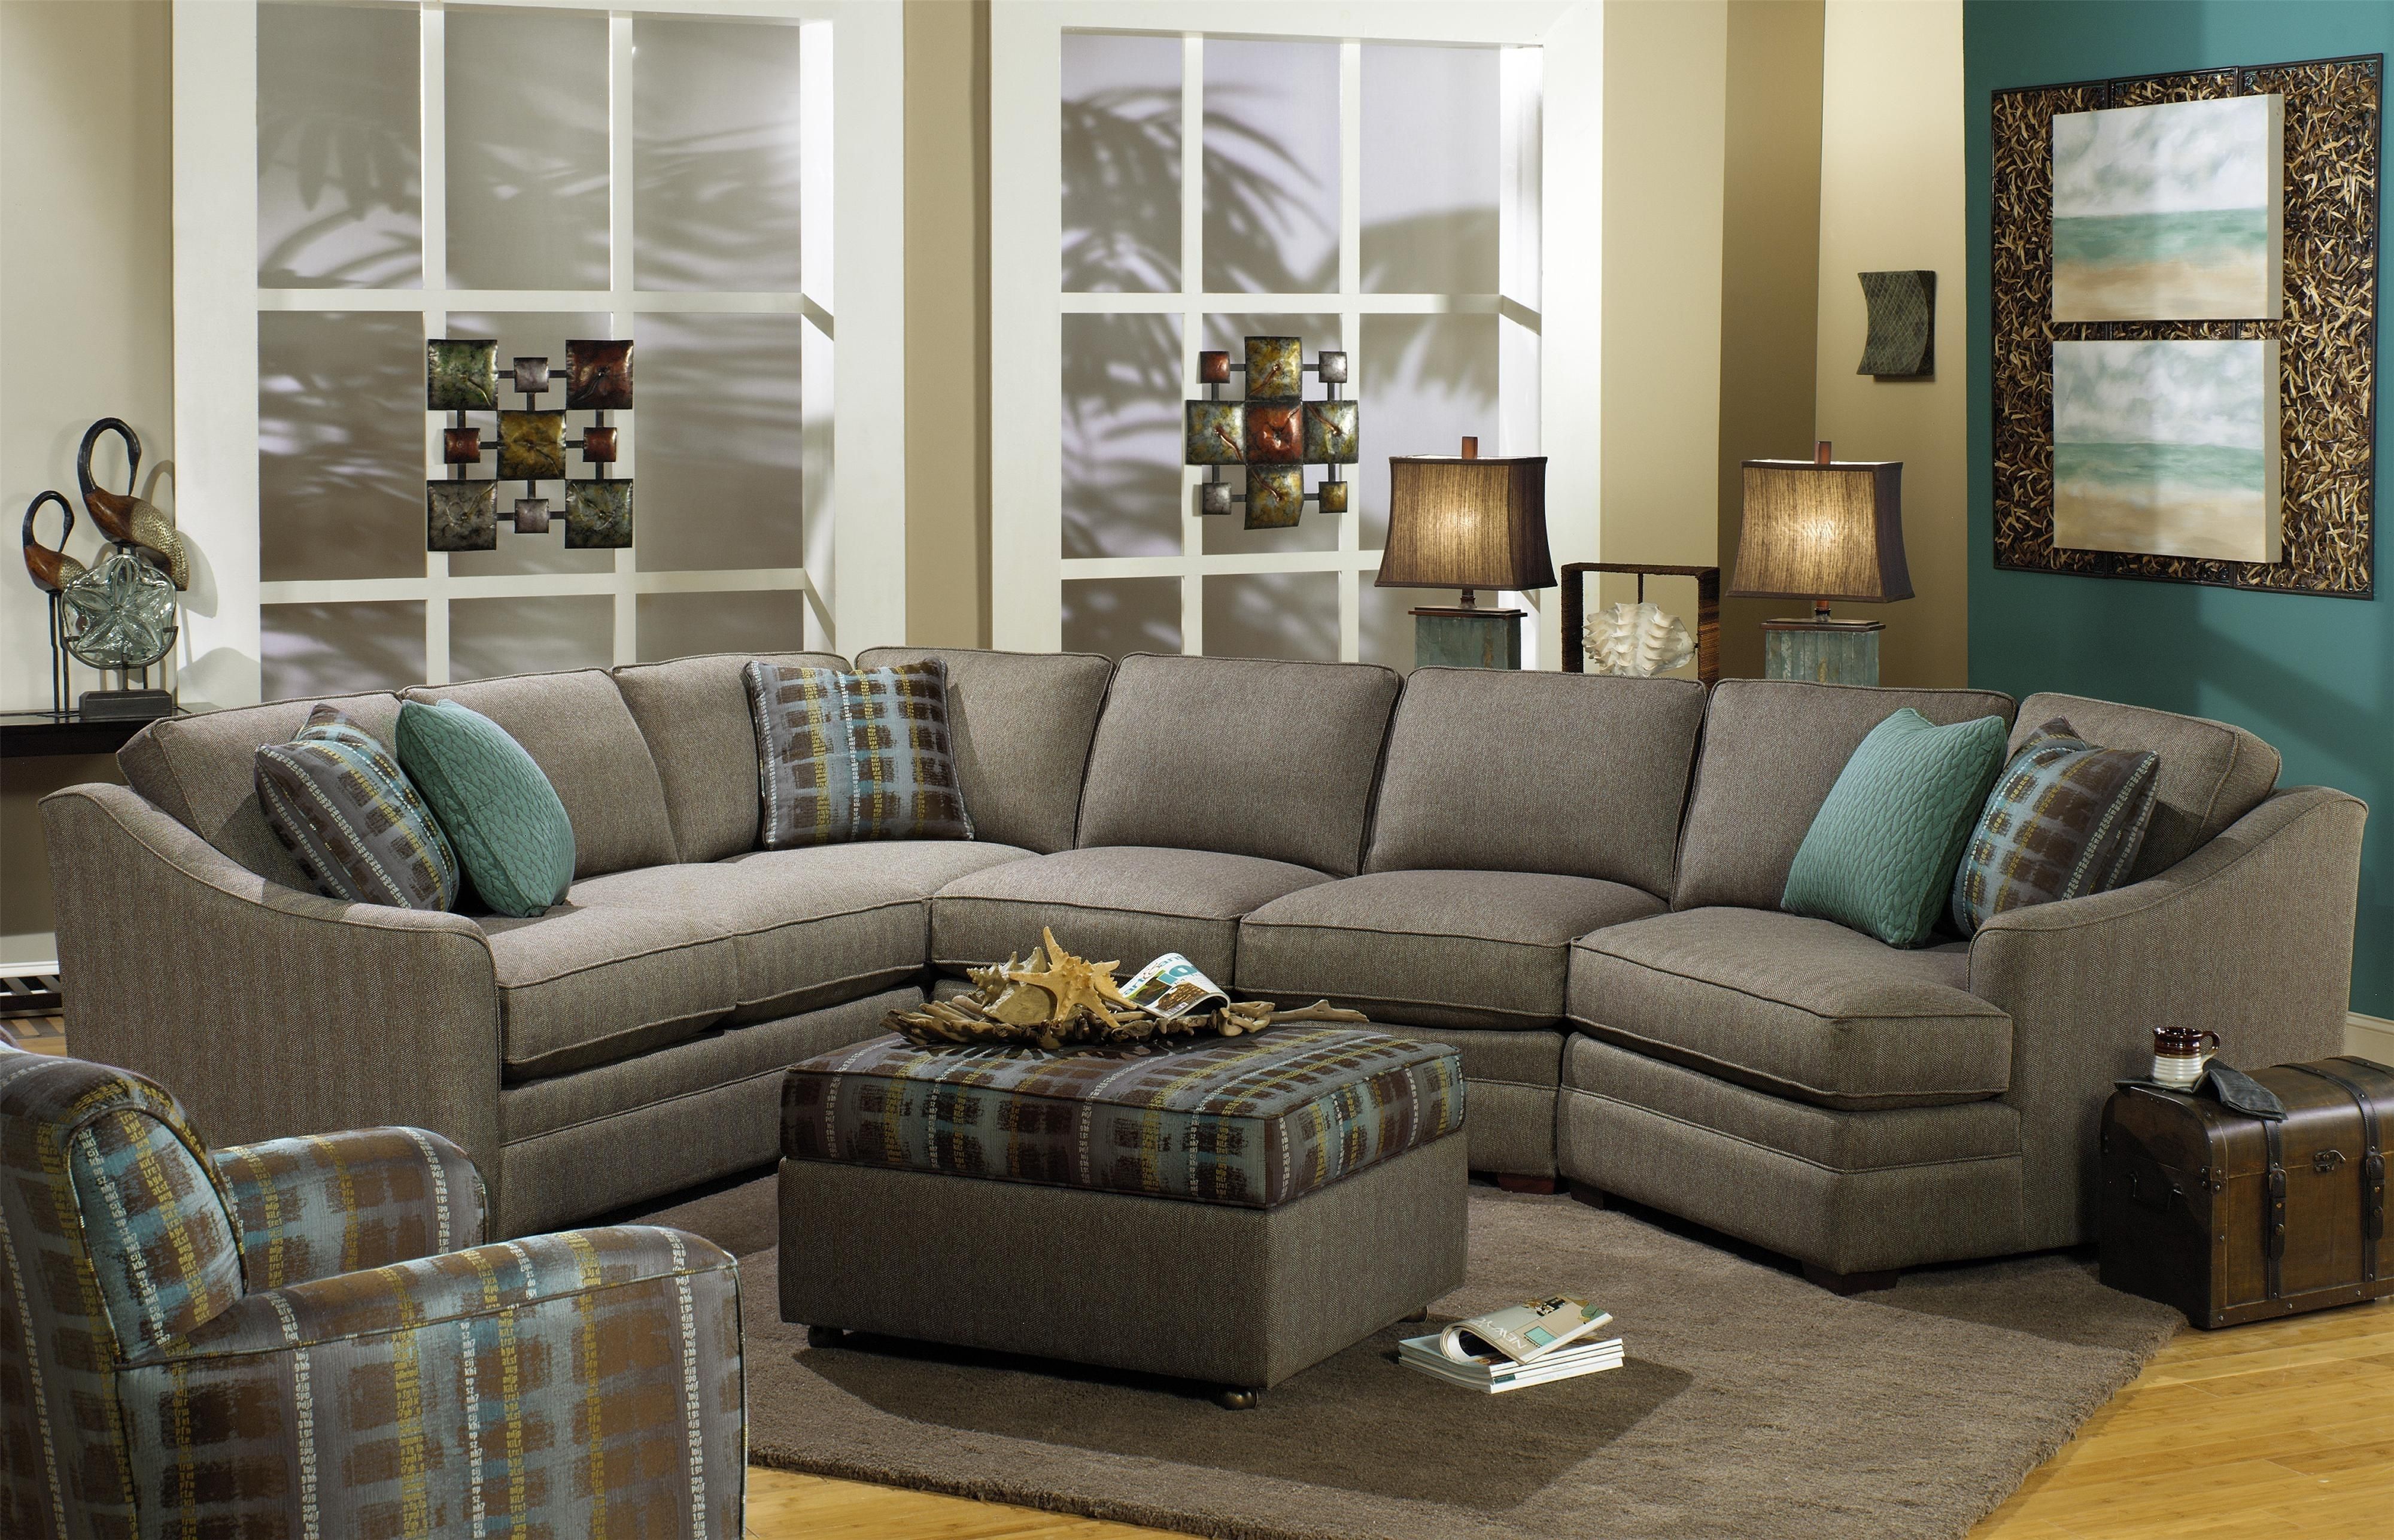 F9 Design Options Customizable 3 Piece Sectional With Raf Cuddler Intended For Benton 4 Piece Sectionals (View 27 of 30)